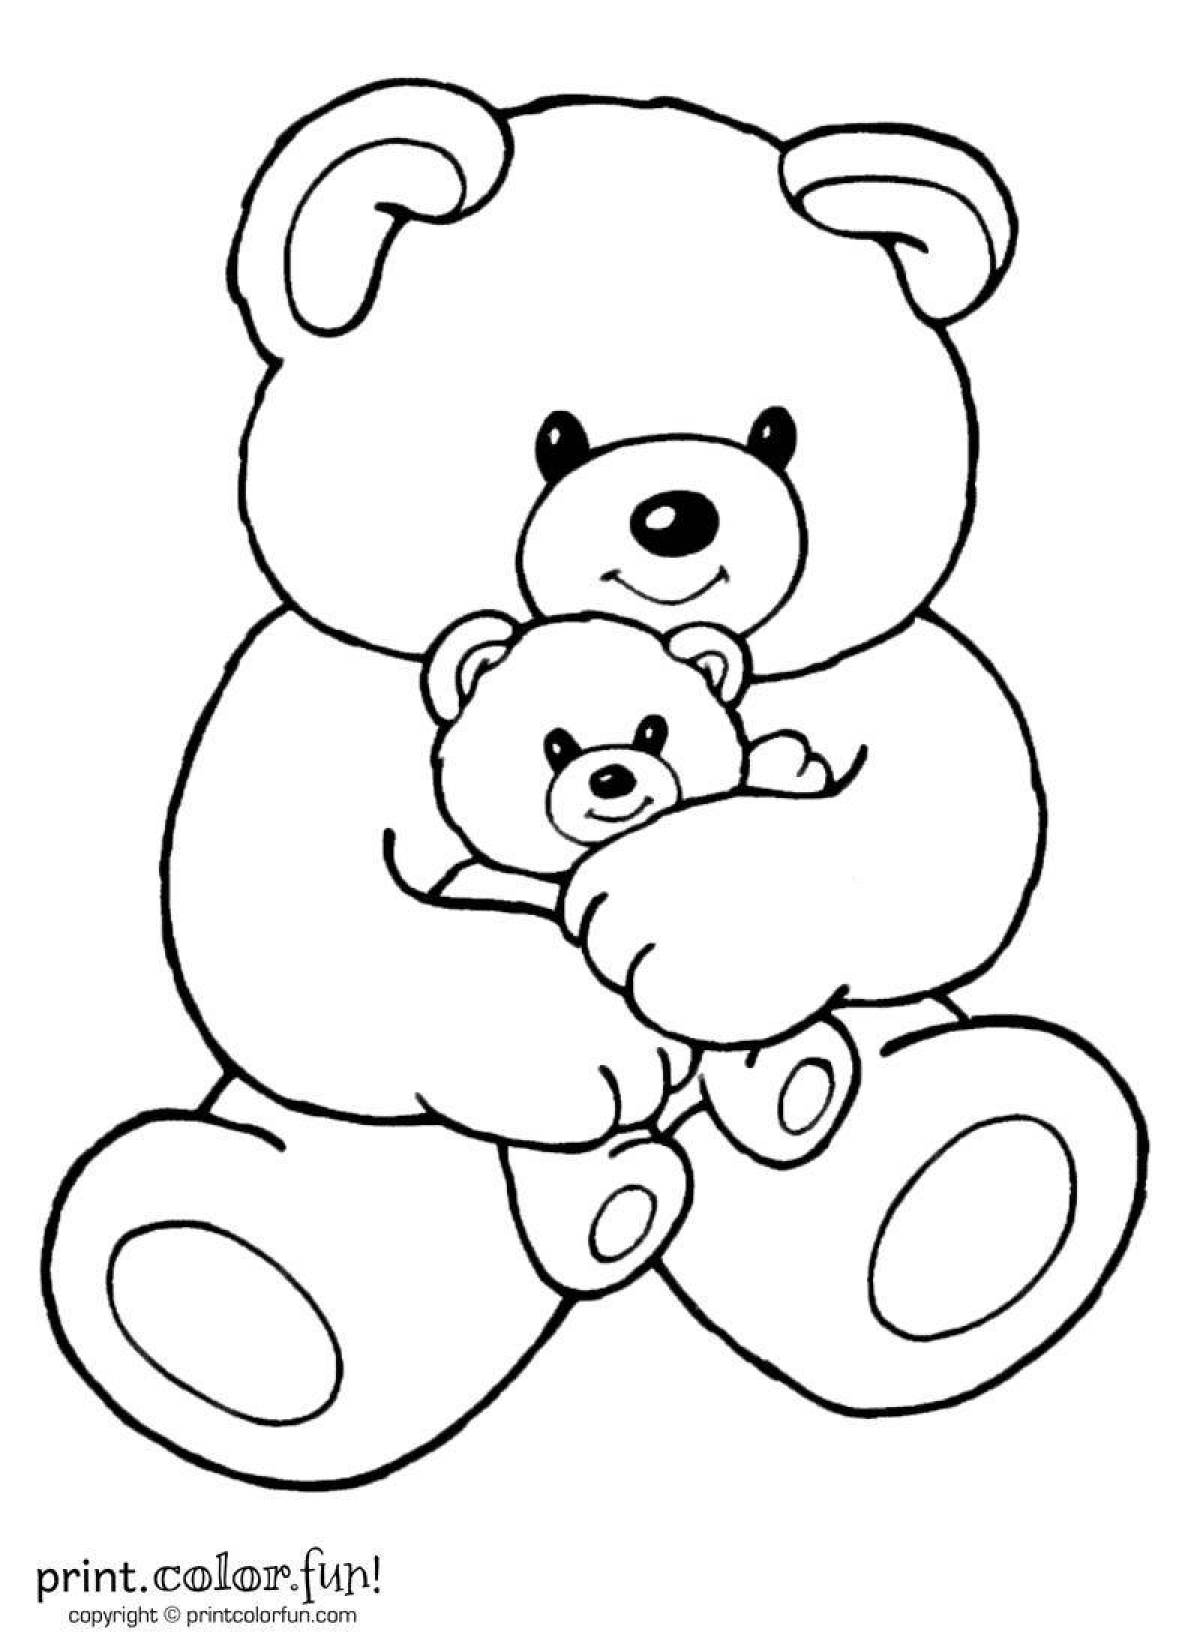 Chubby bear coloring book for kids